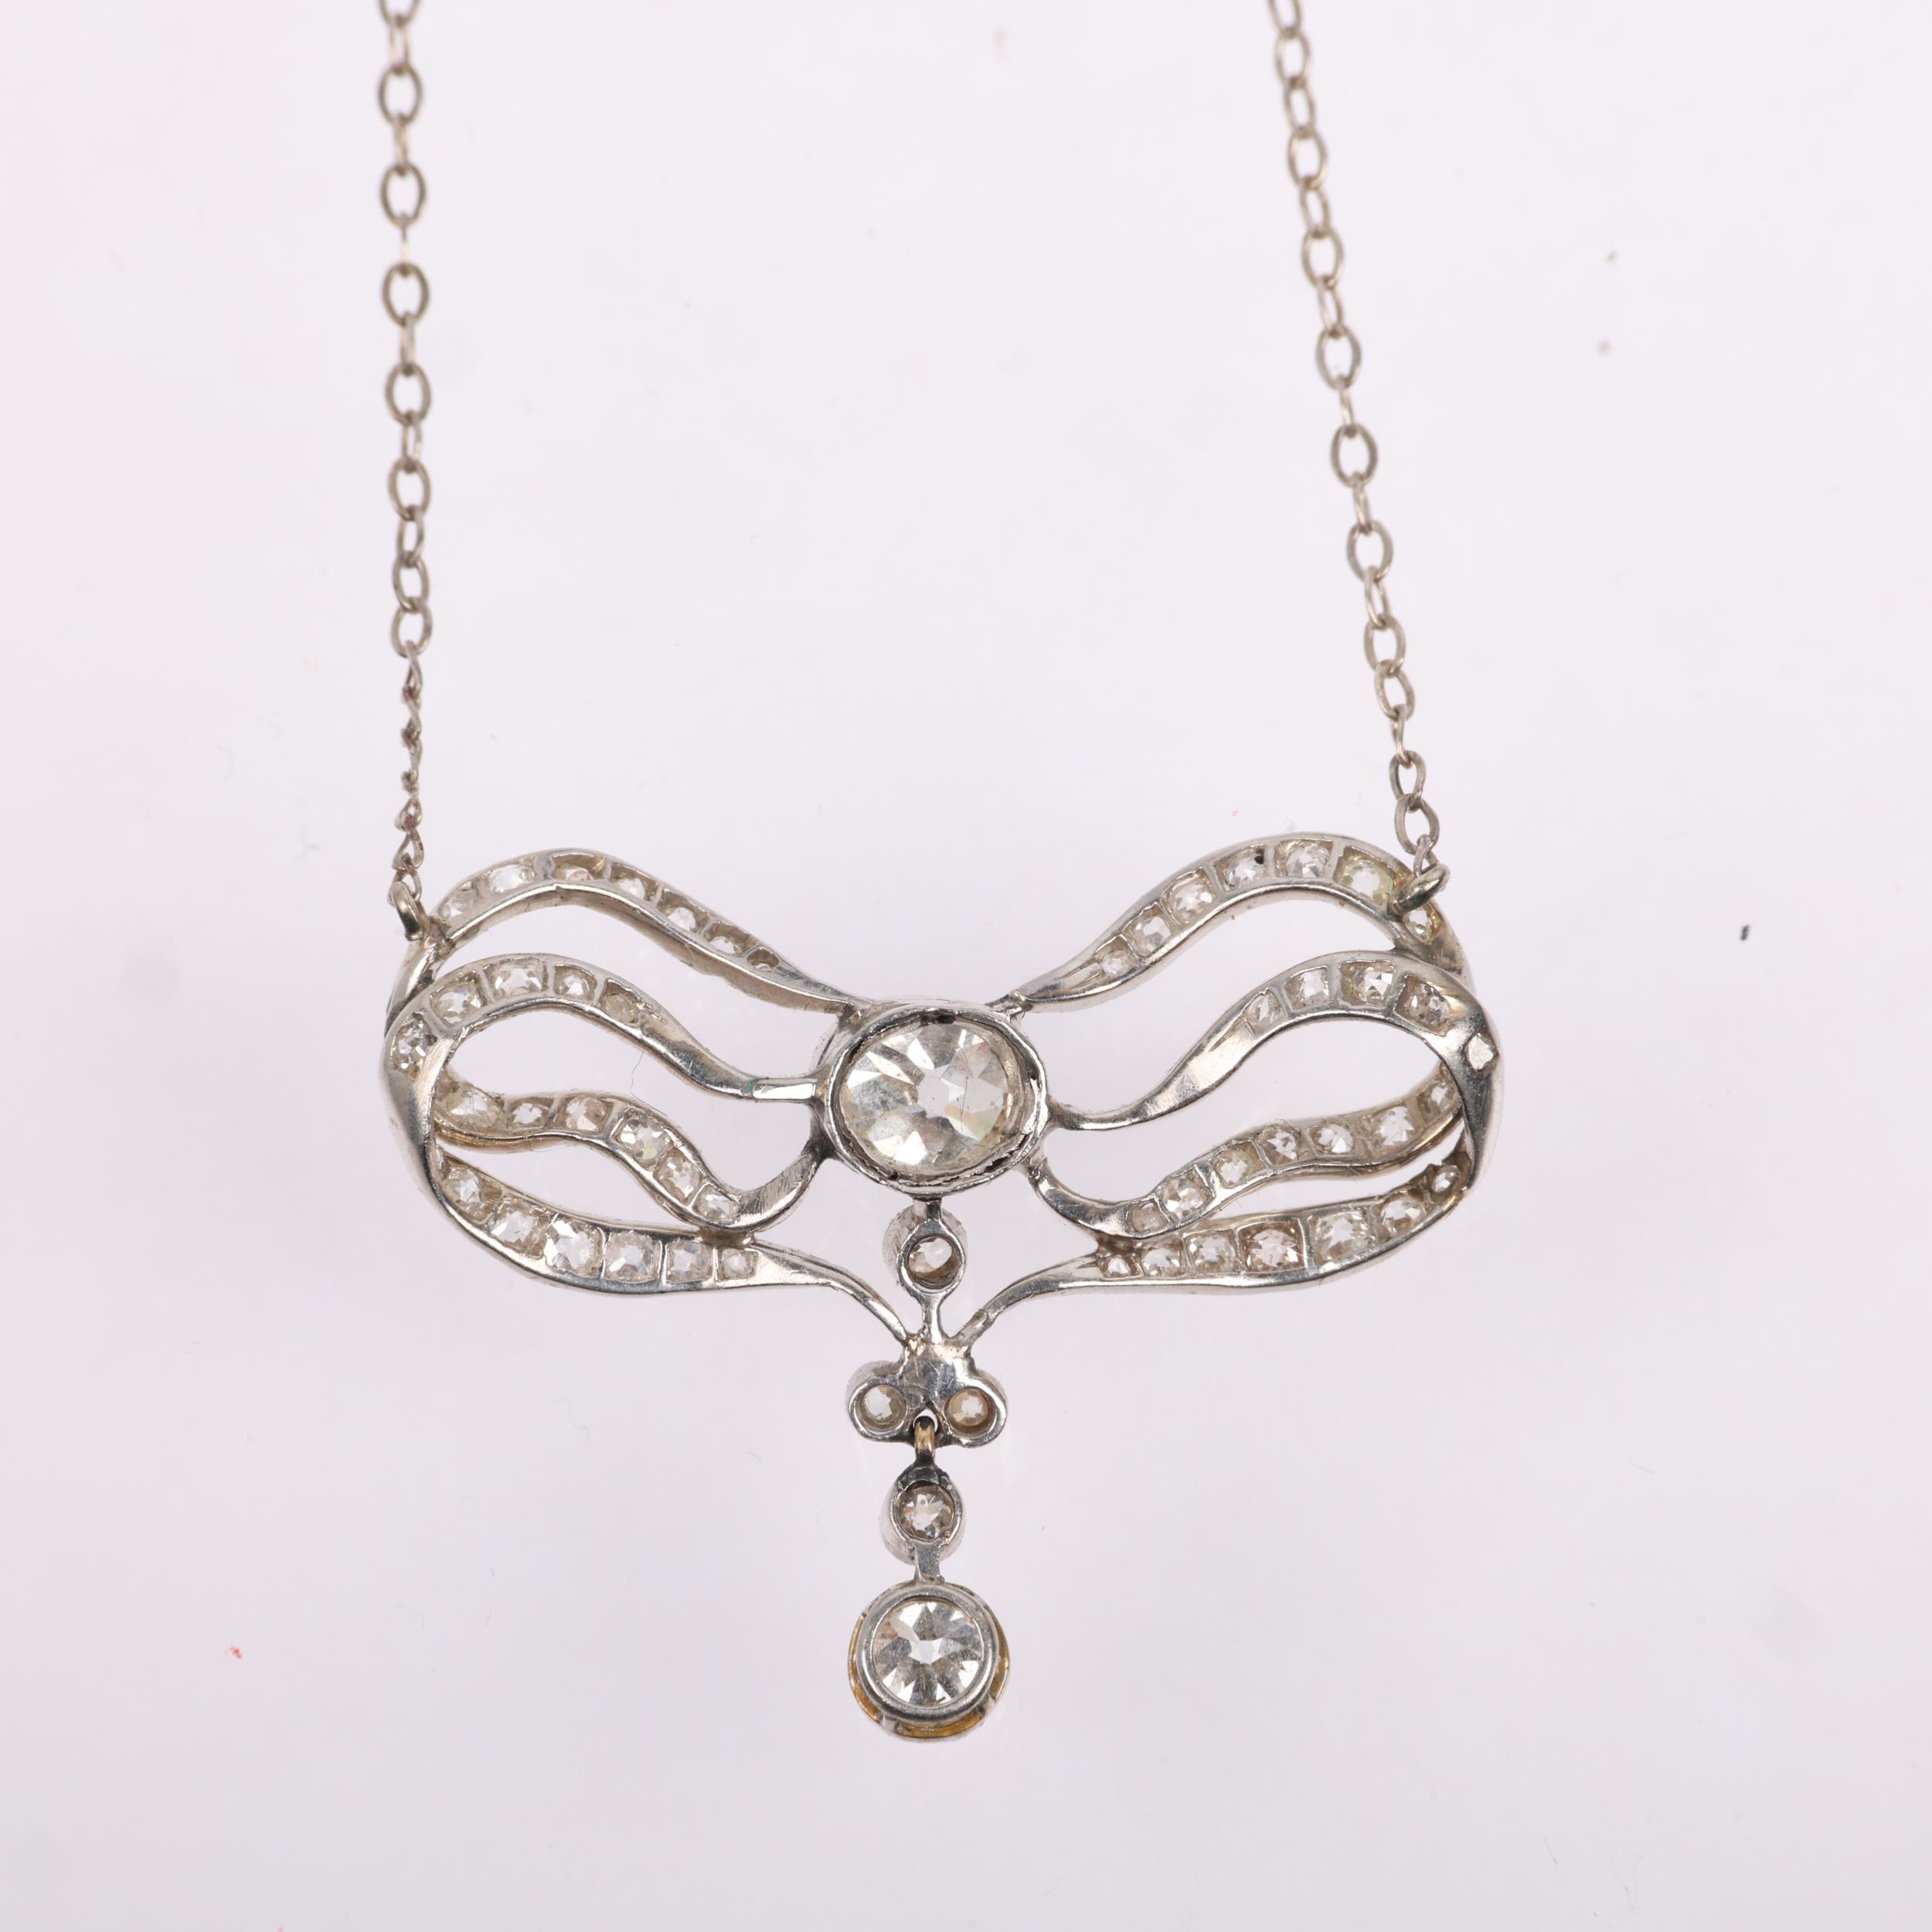 An Art Nouveau French diamond ribbon bow pendant necklace, circa 1910, set with old and eight-cut - Image 3 of 4